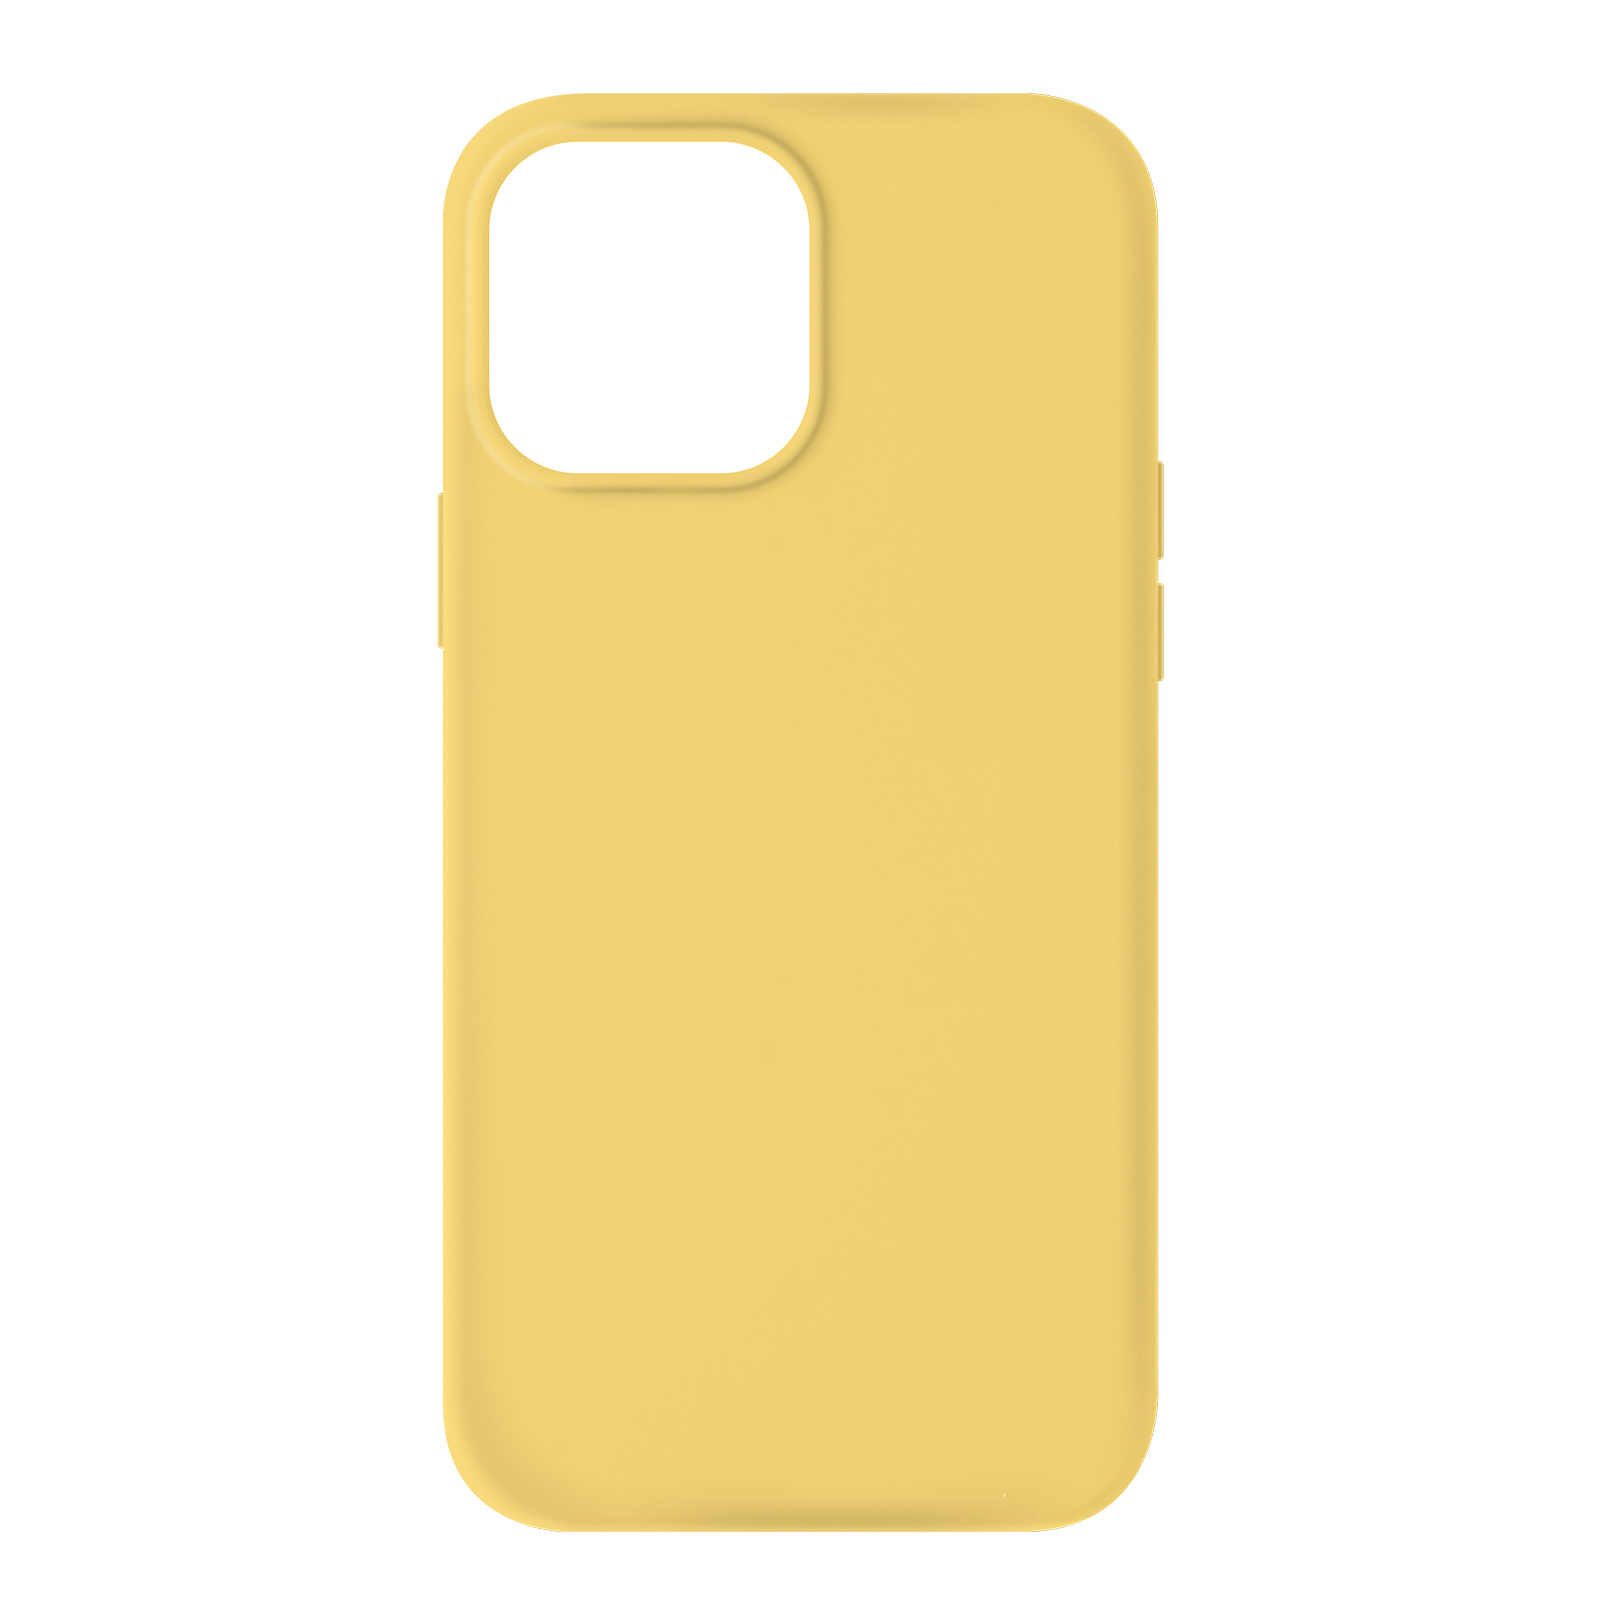 AVIZAR iPhone Backcover, 13 Apple, Gelb Series, Pro, Likid